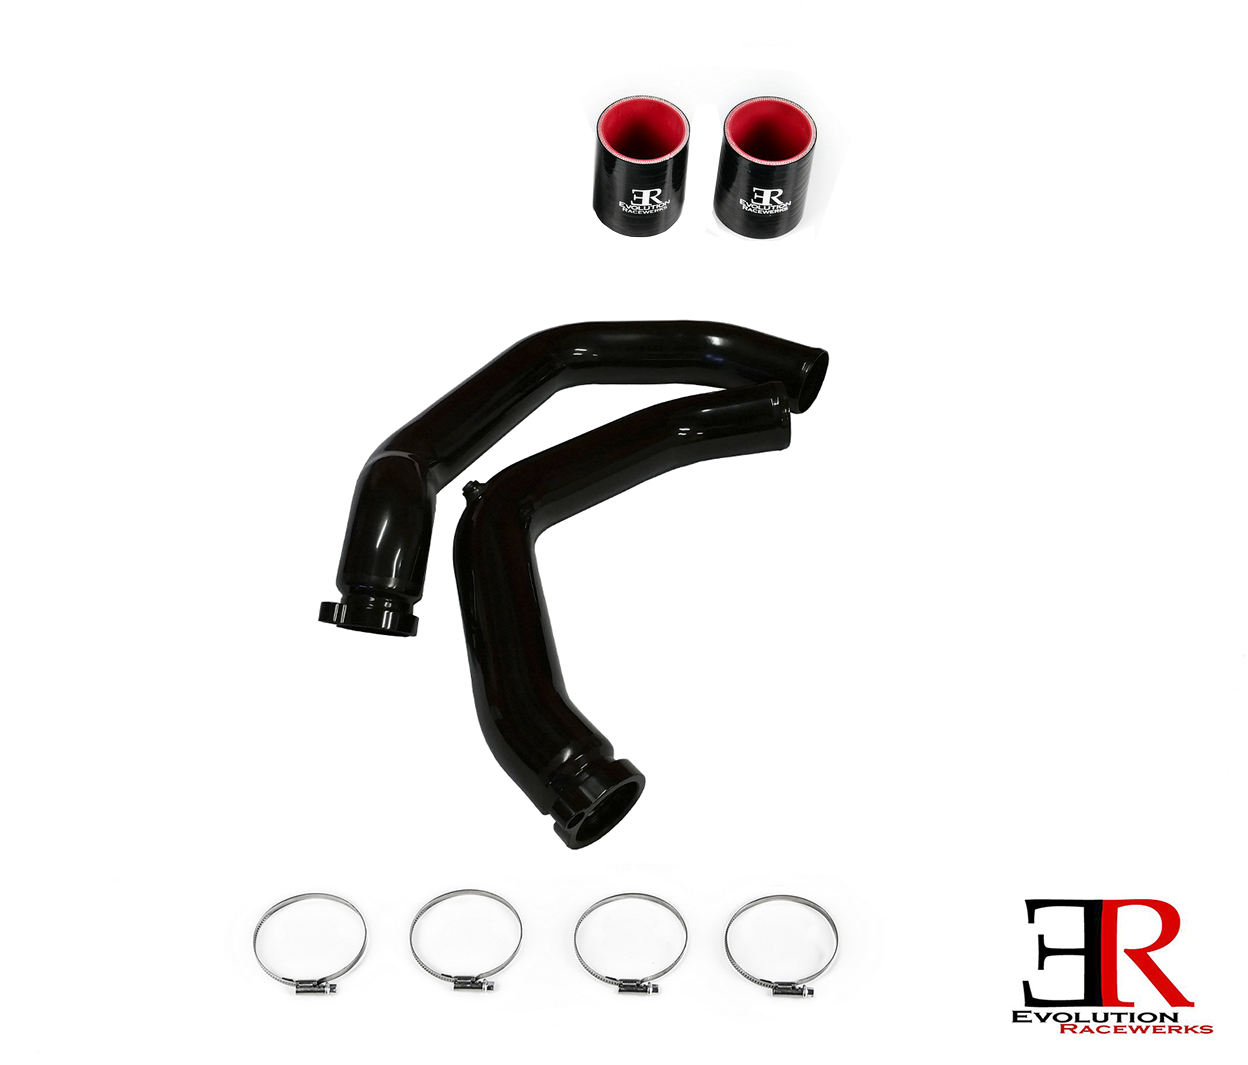 evolution racewerks bmw s55 m3 m4 charge pipe shown in anodized black finish. this CP Fit the F80 and F82 chassis